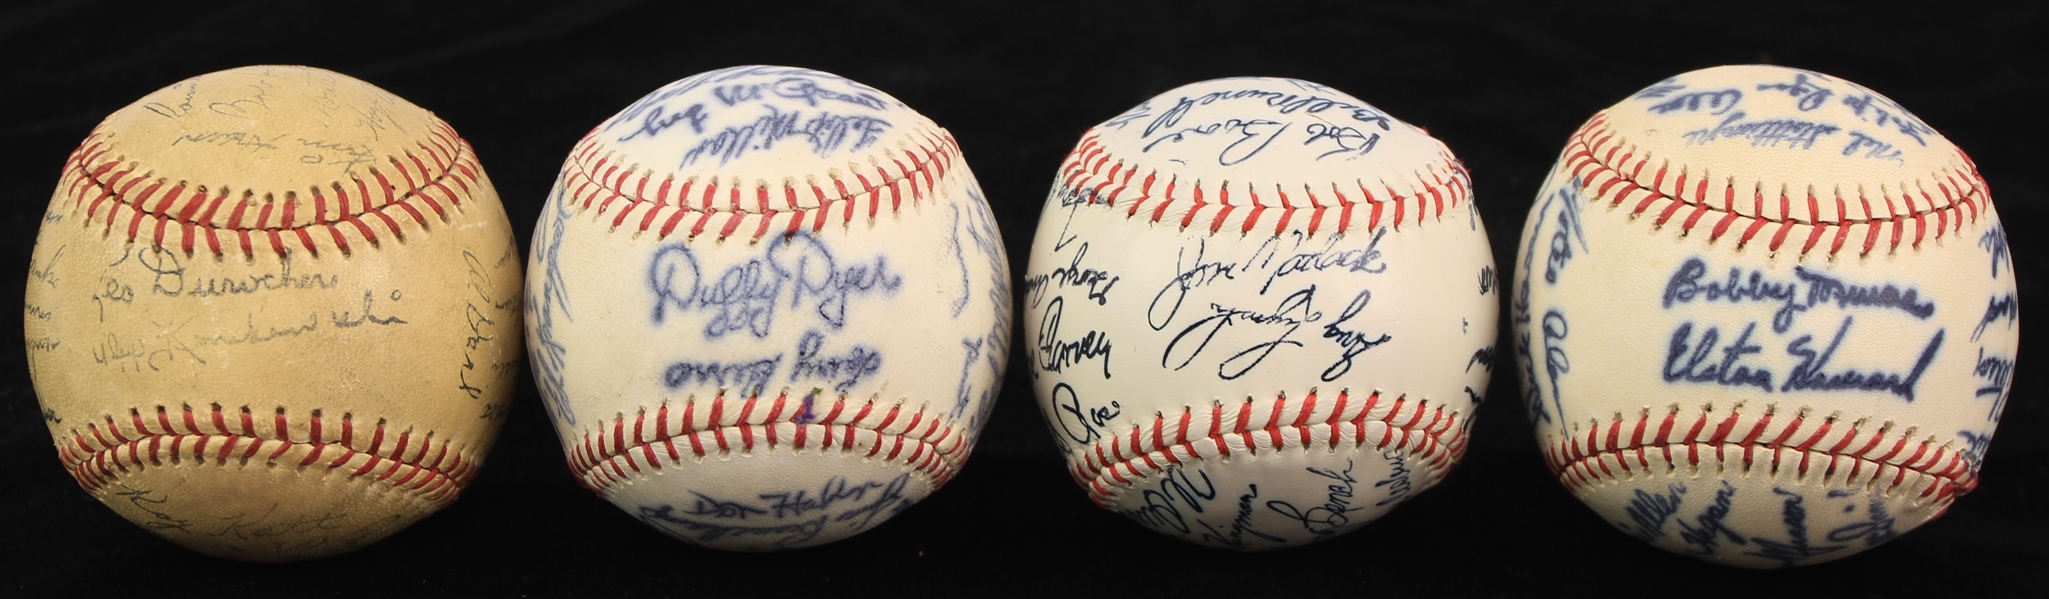 1950s-80s Facsimile Stamped Team Signed Baseballs - Lot of 4 w/ New York Yankees, New York Giants & More